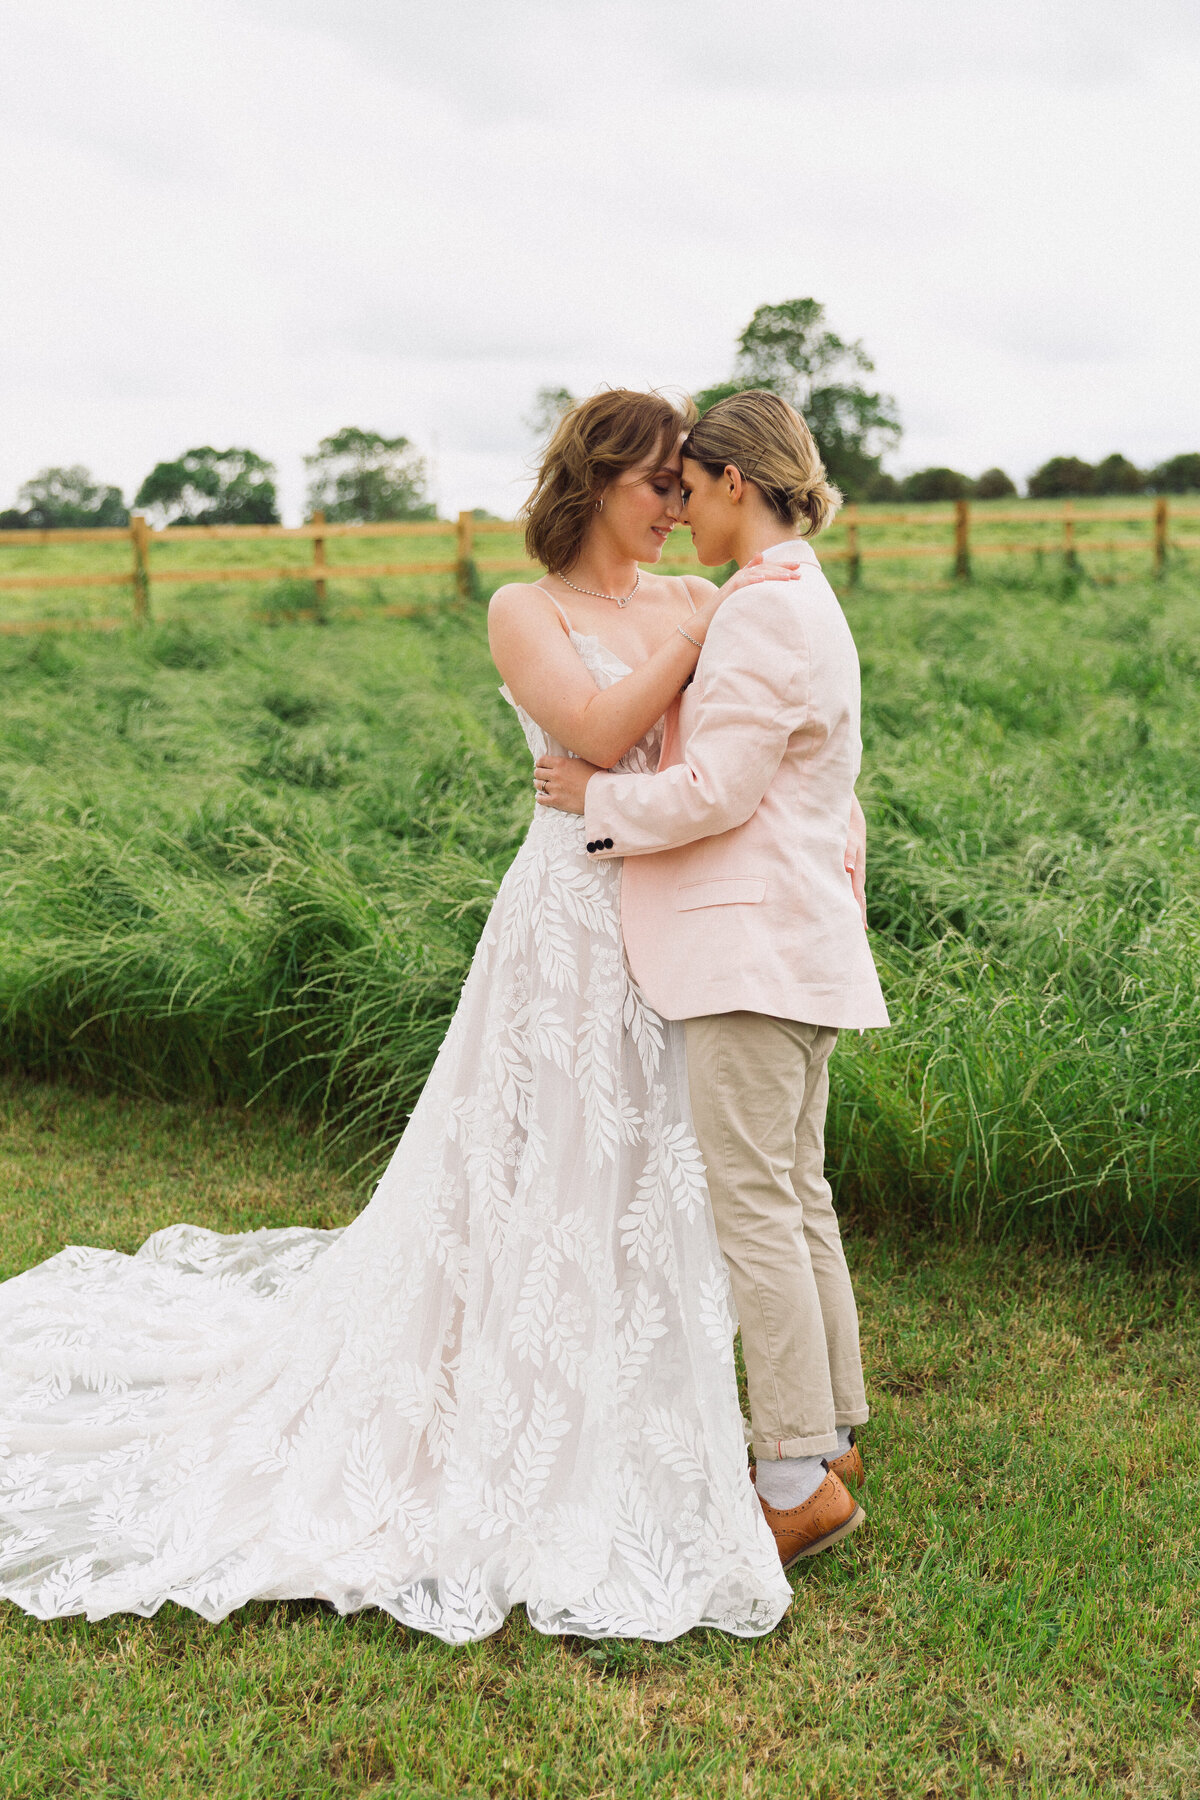 Amy Cutliffe Photography (17)